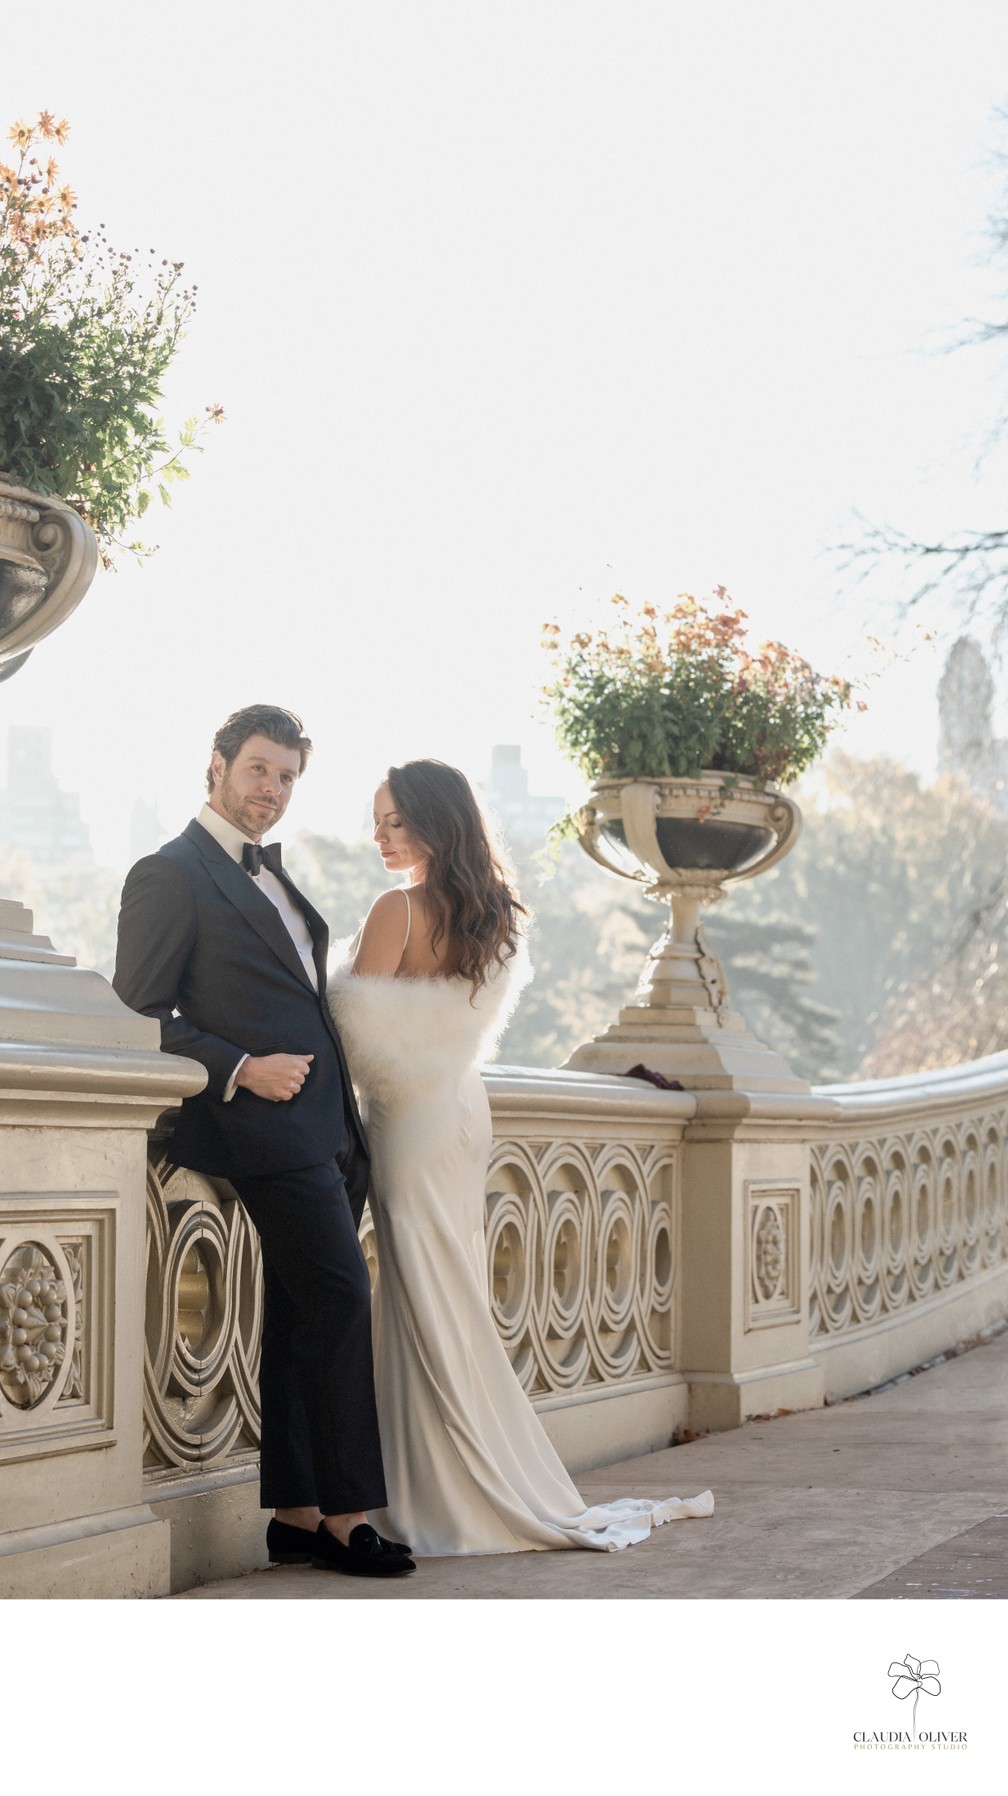 Best engagement photo locations in NYC: Bow Bridge